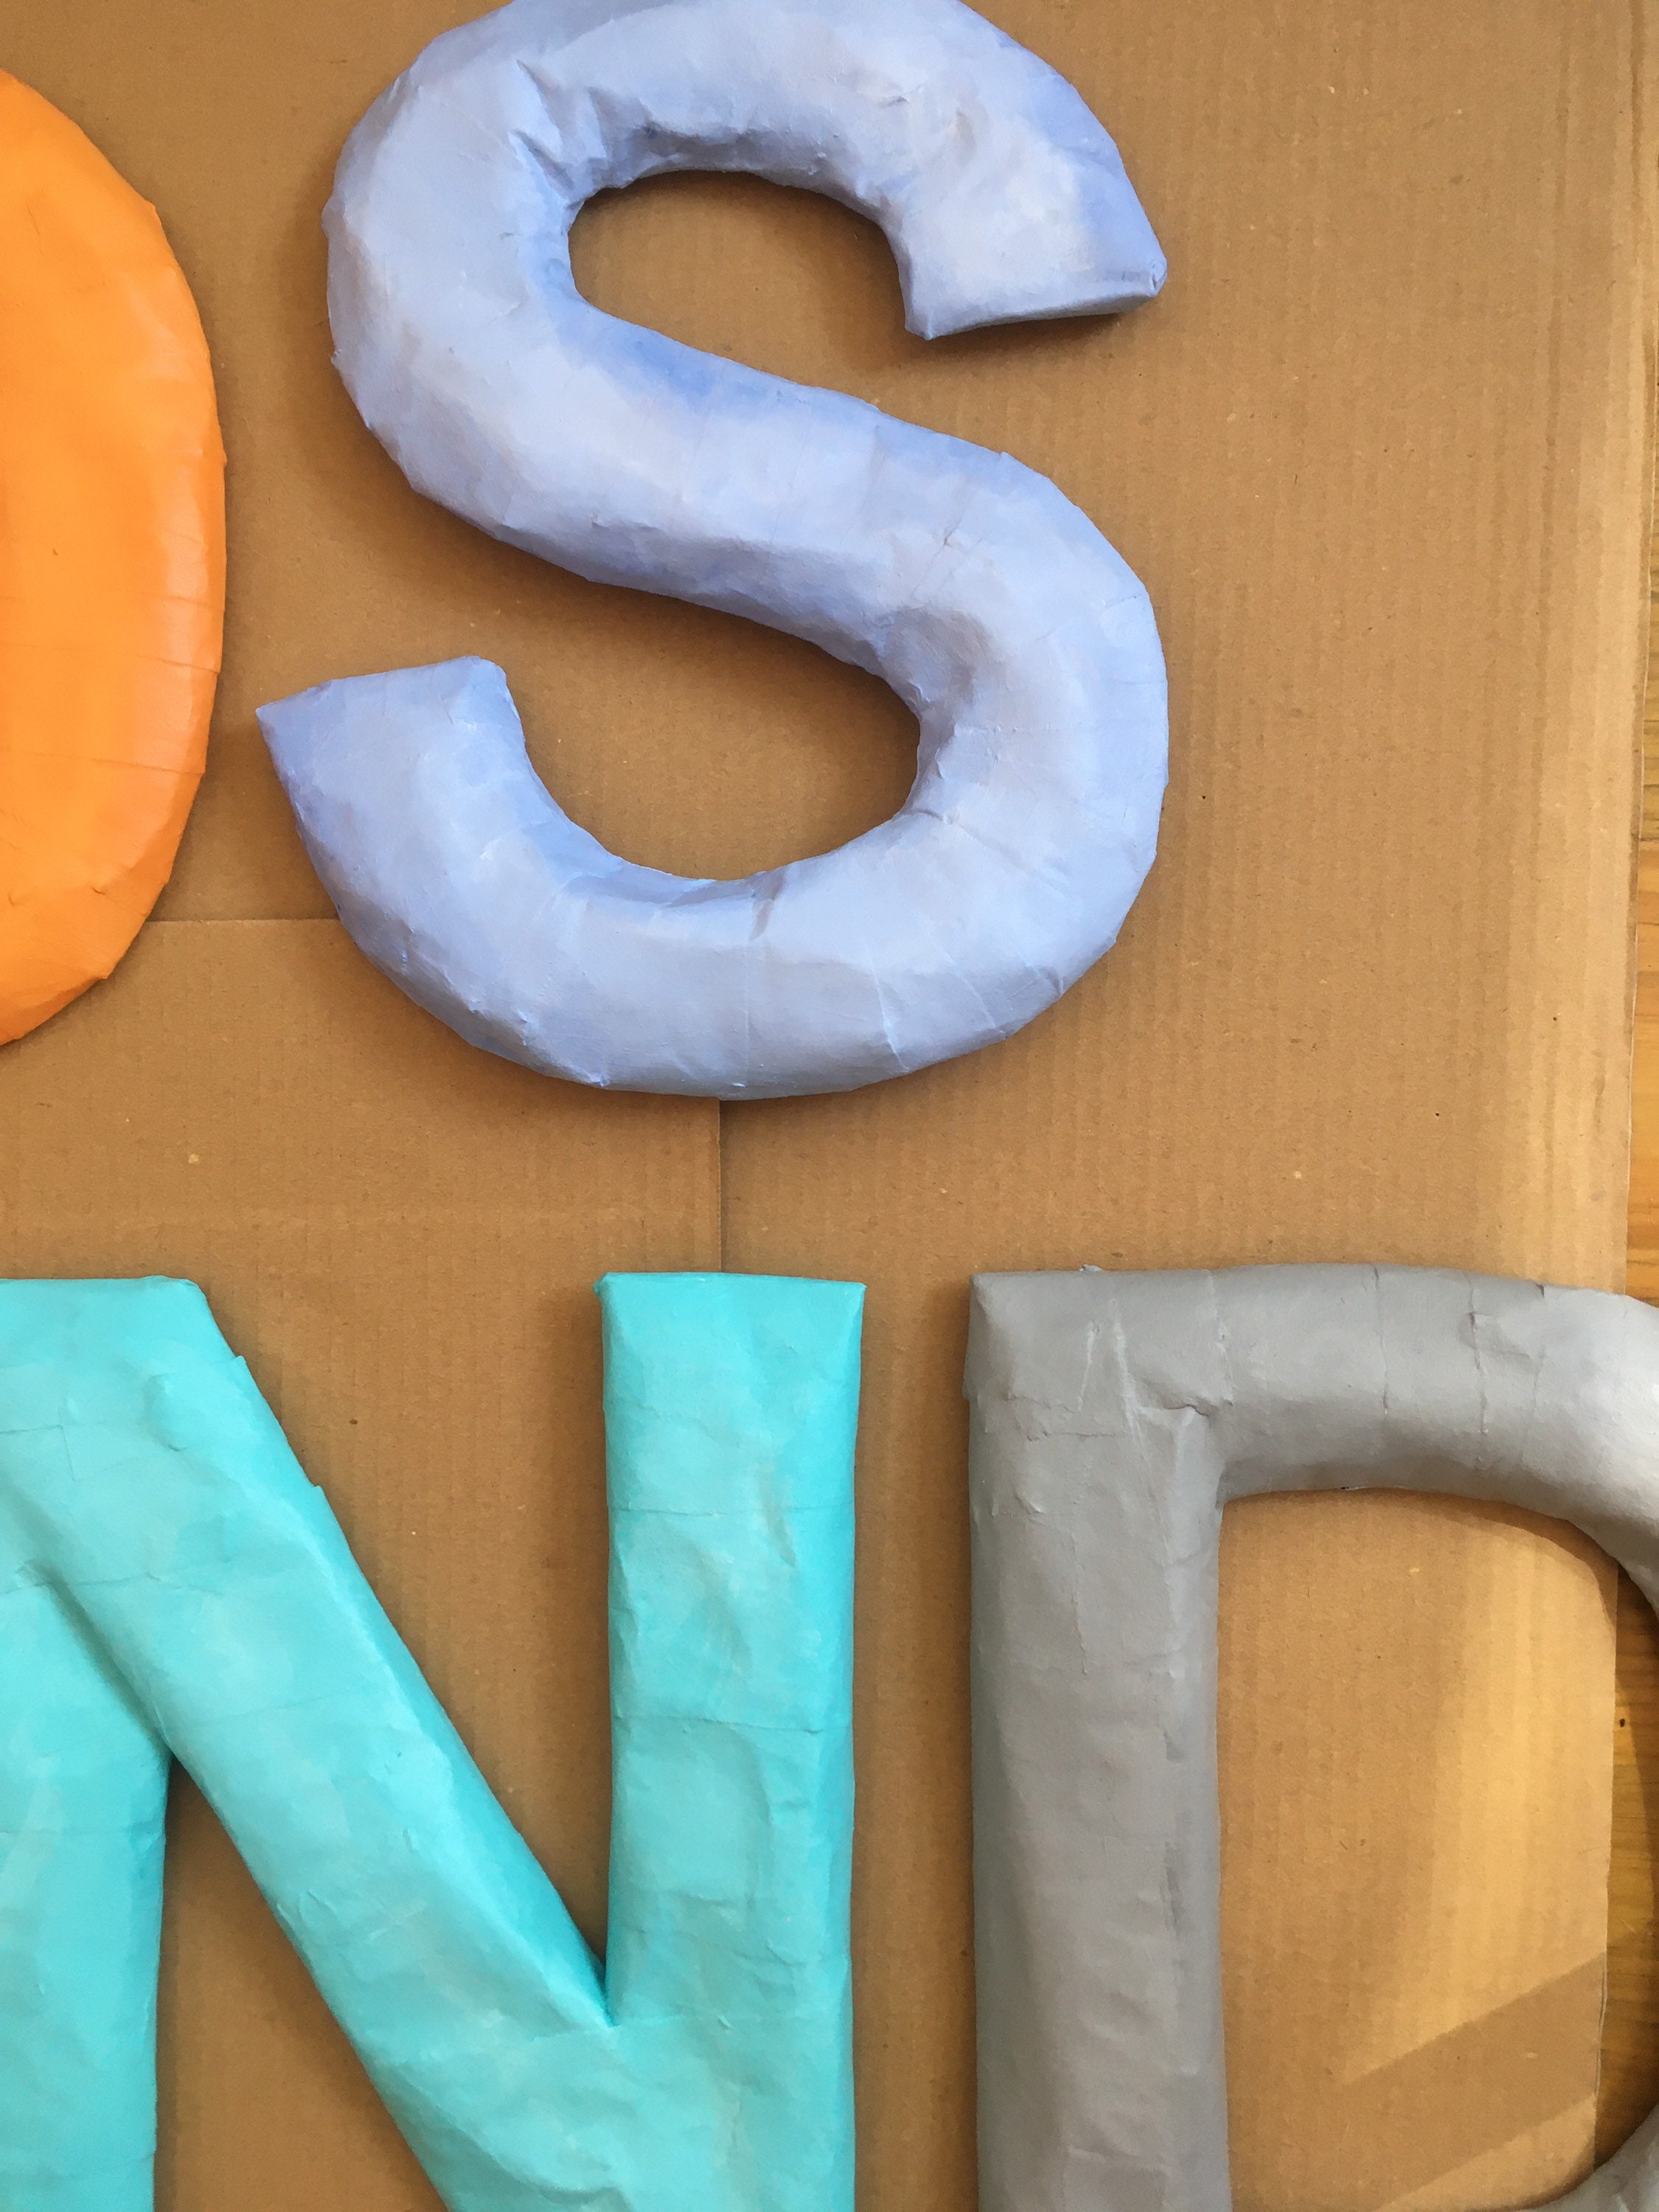 33 Paper Mache Numbers and Letters - Cardboard ideas  cardboard letters,  graduation decorations, paper mache